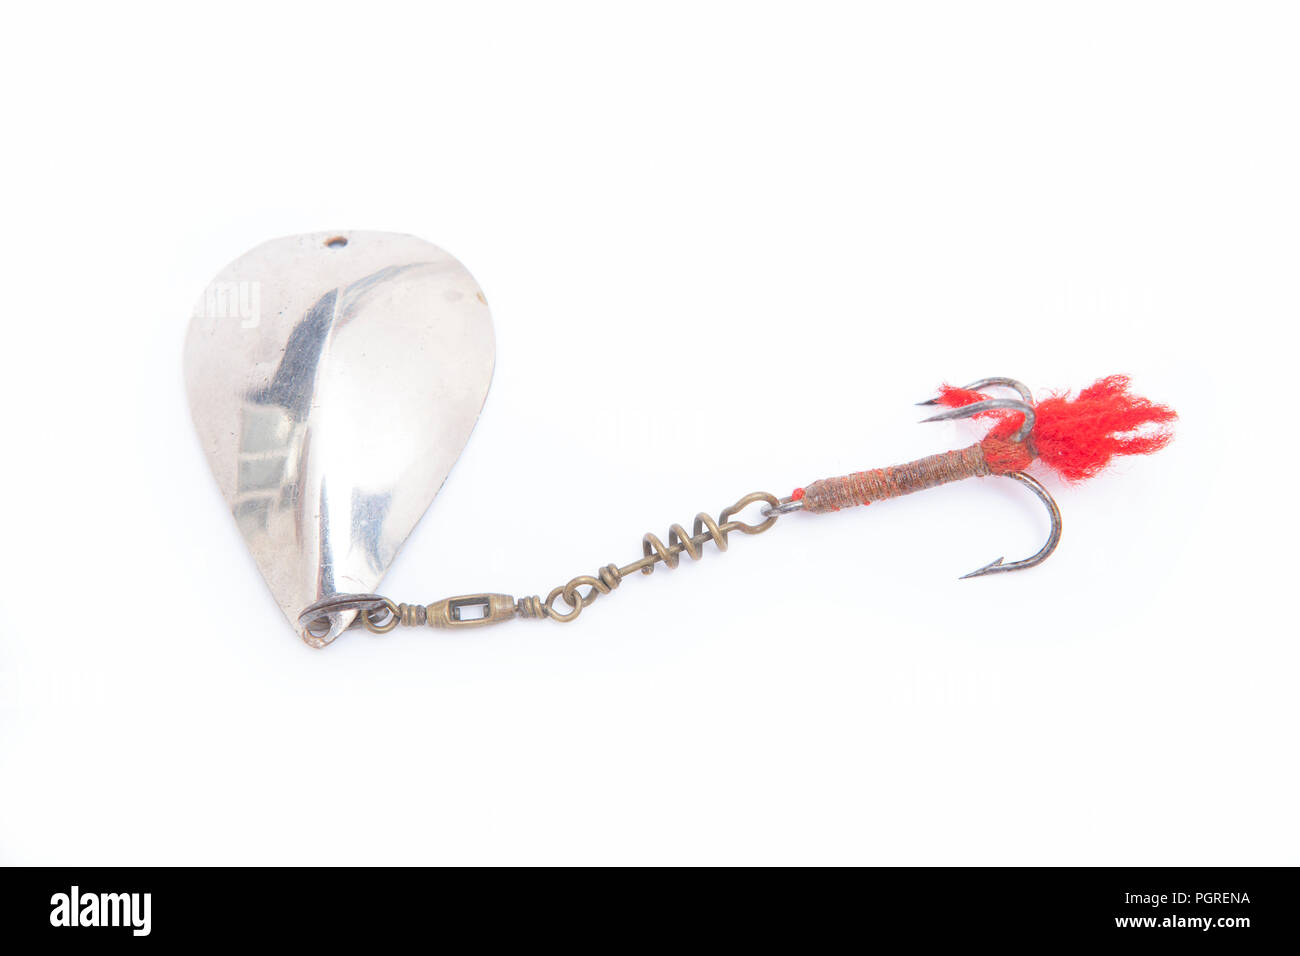 https://c8.alamy.com/comp/PGRENA/an-old-metal-fishing-lure-designed-for-catching-predatory-fish-equipped-with-a-treble-hook-from-a-collection-of-vintage-and-modern-fishing-tackle-no-PGRENA.jpg